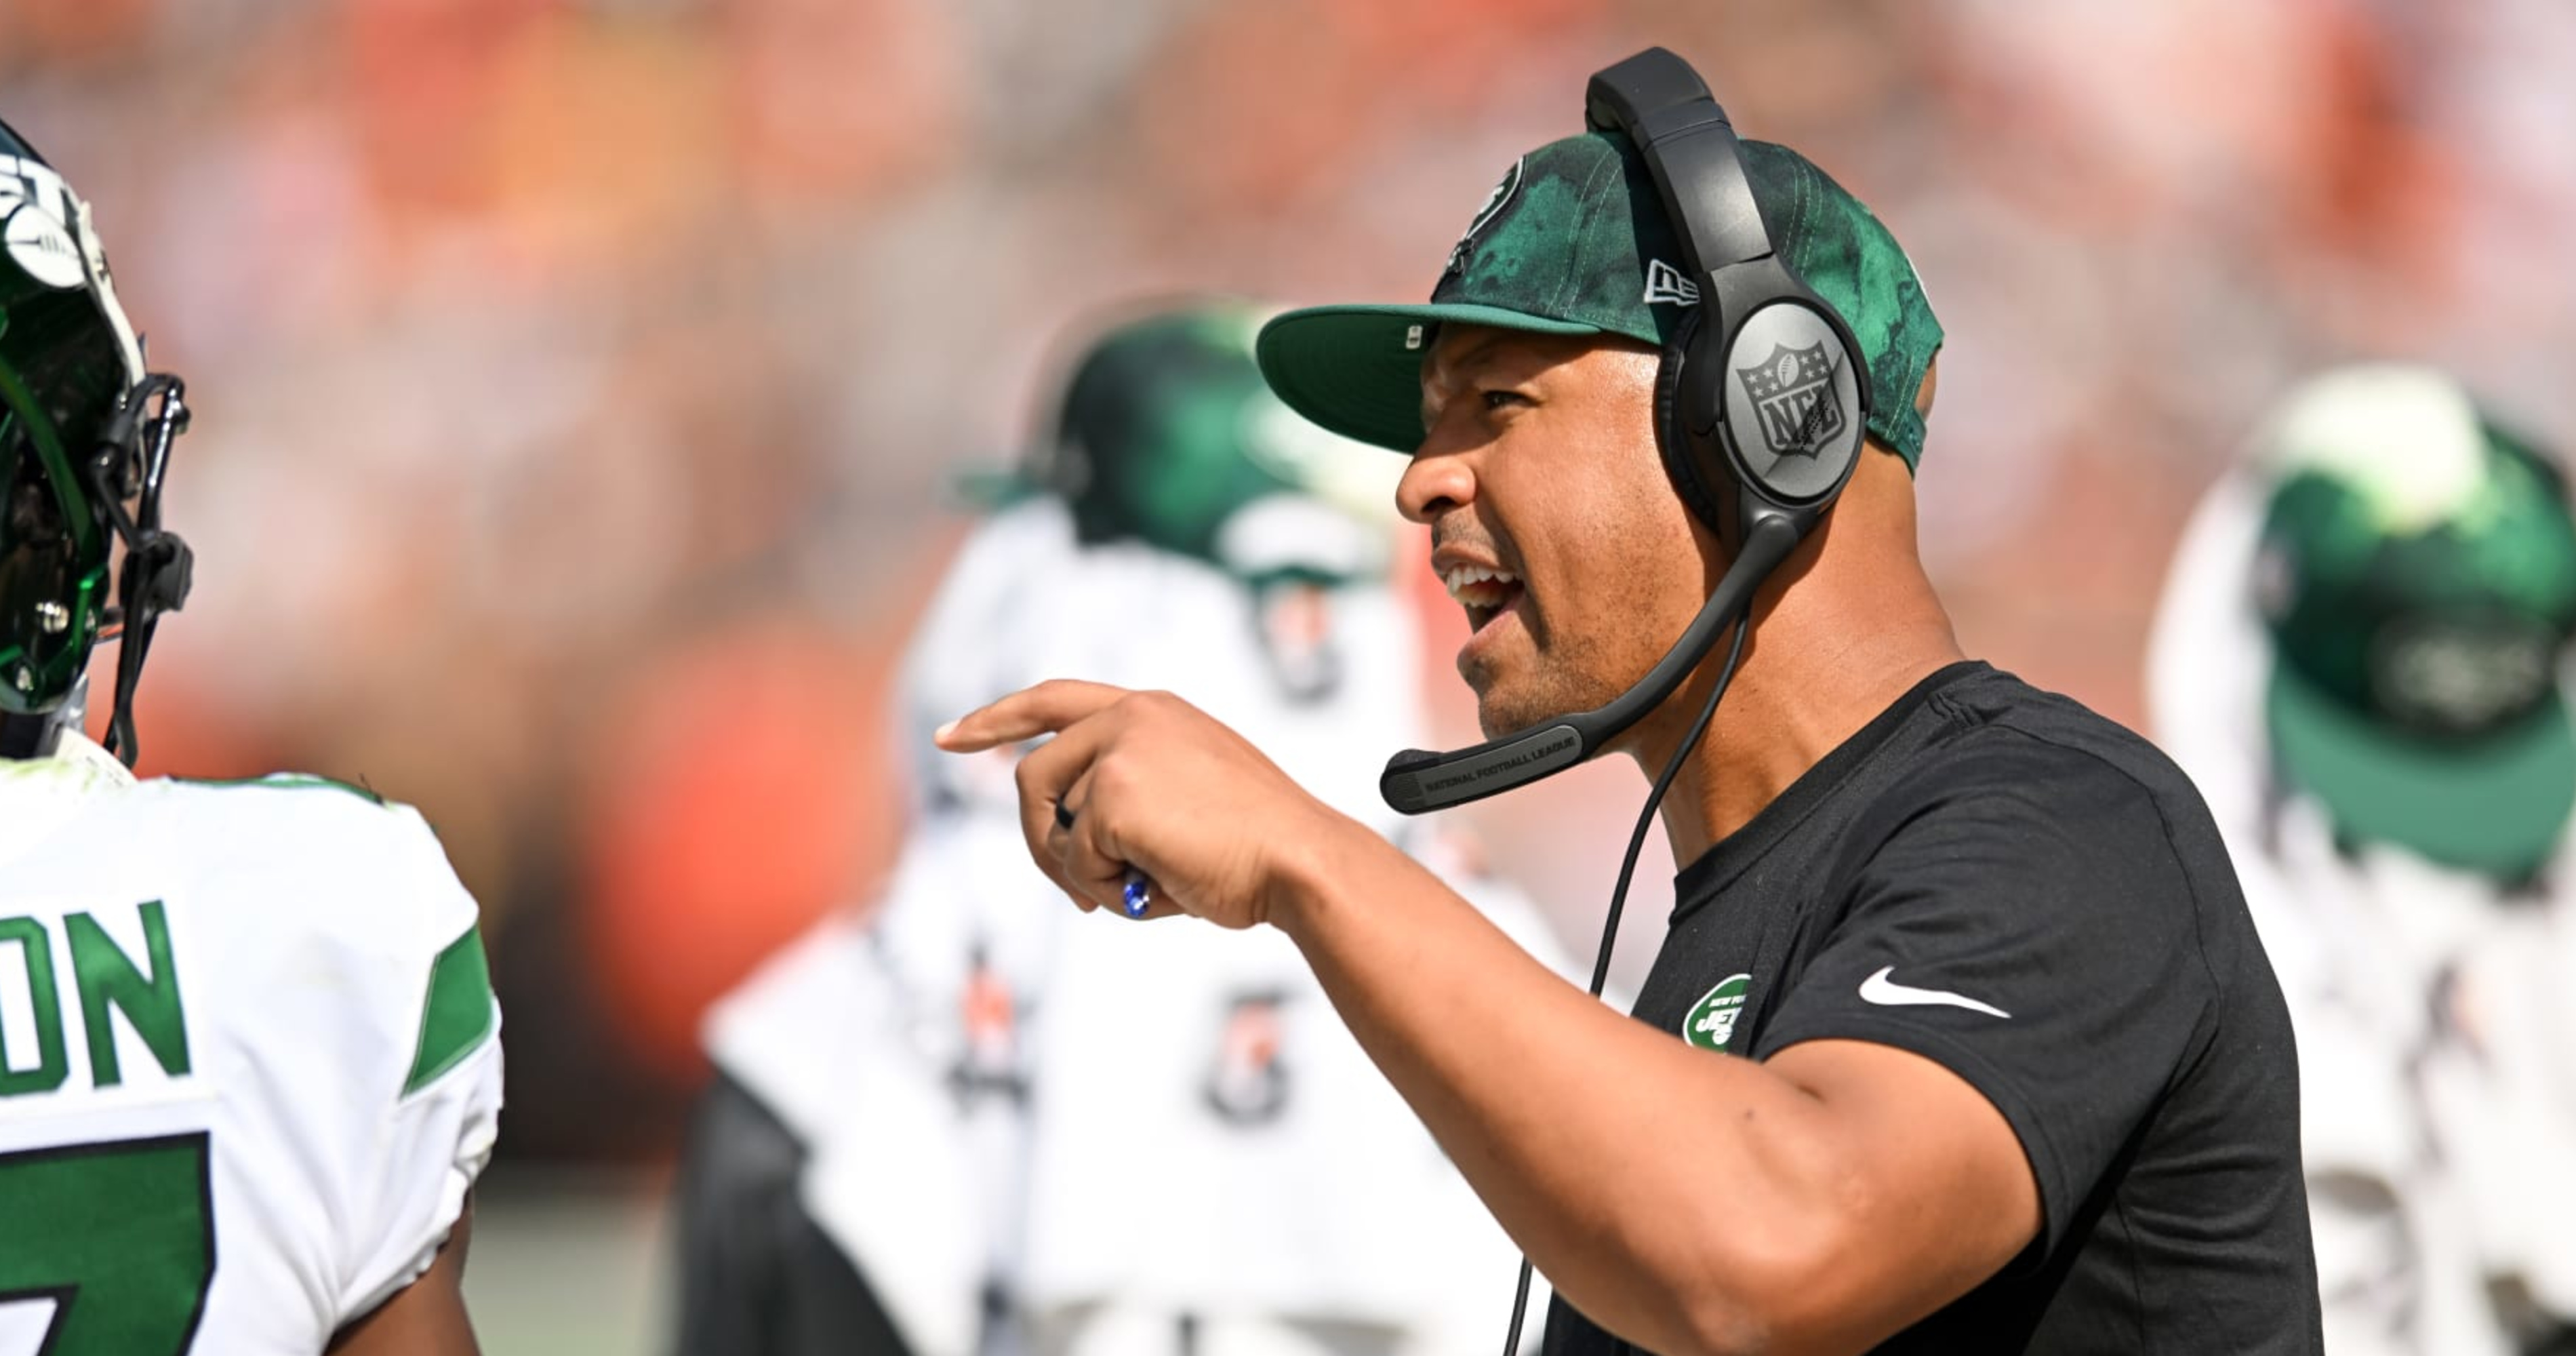 Jets WR Coach Miles Austin Suspended 1 Year for Violating NFL's